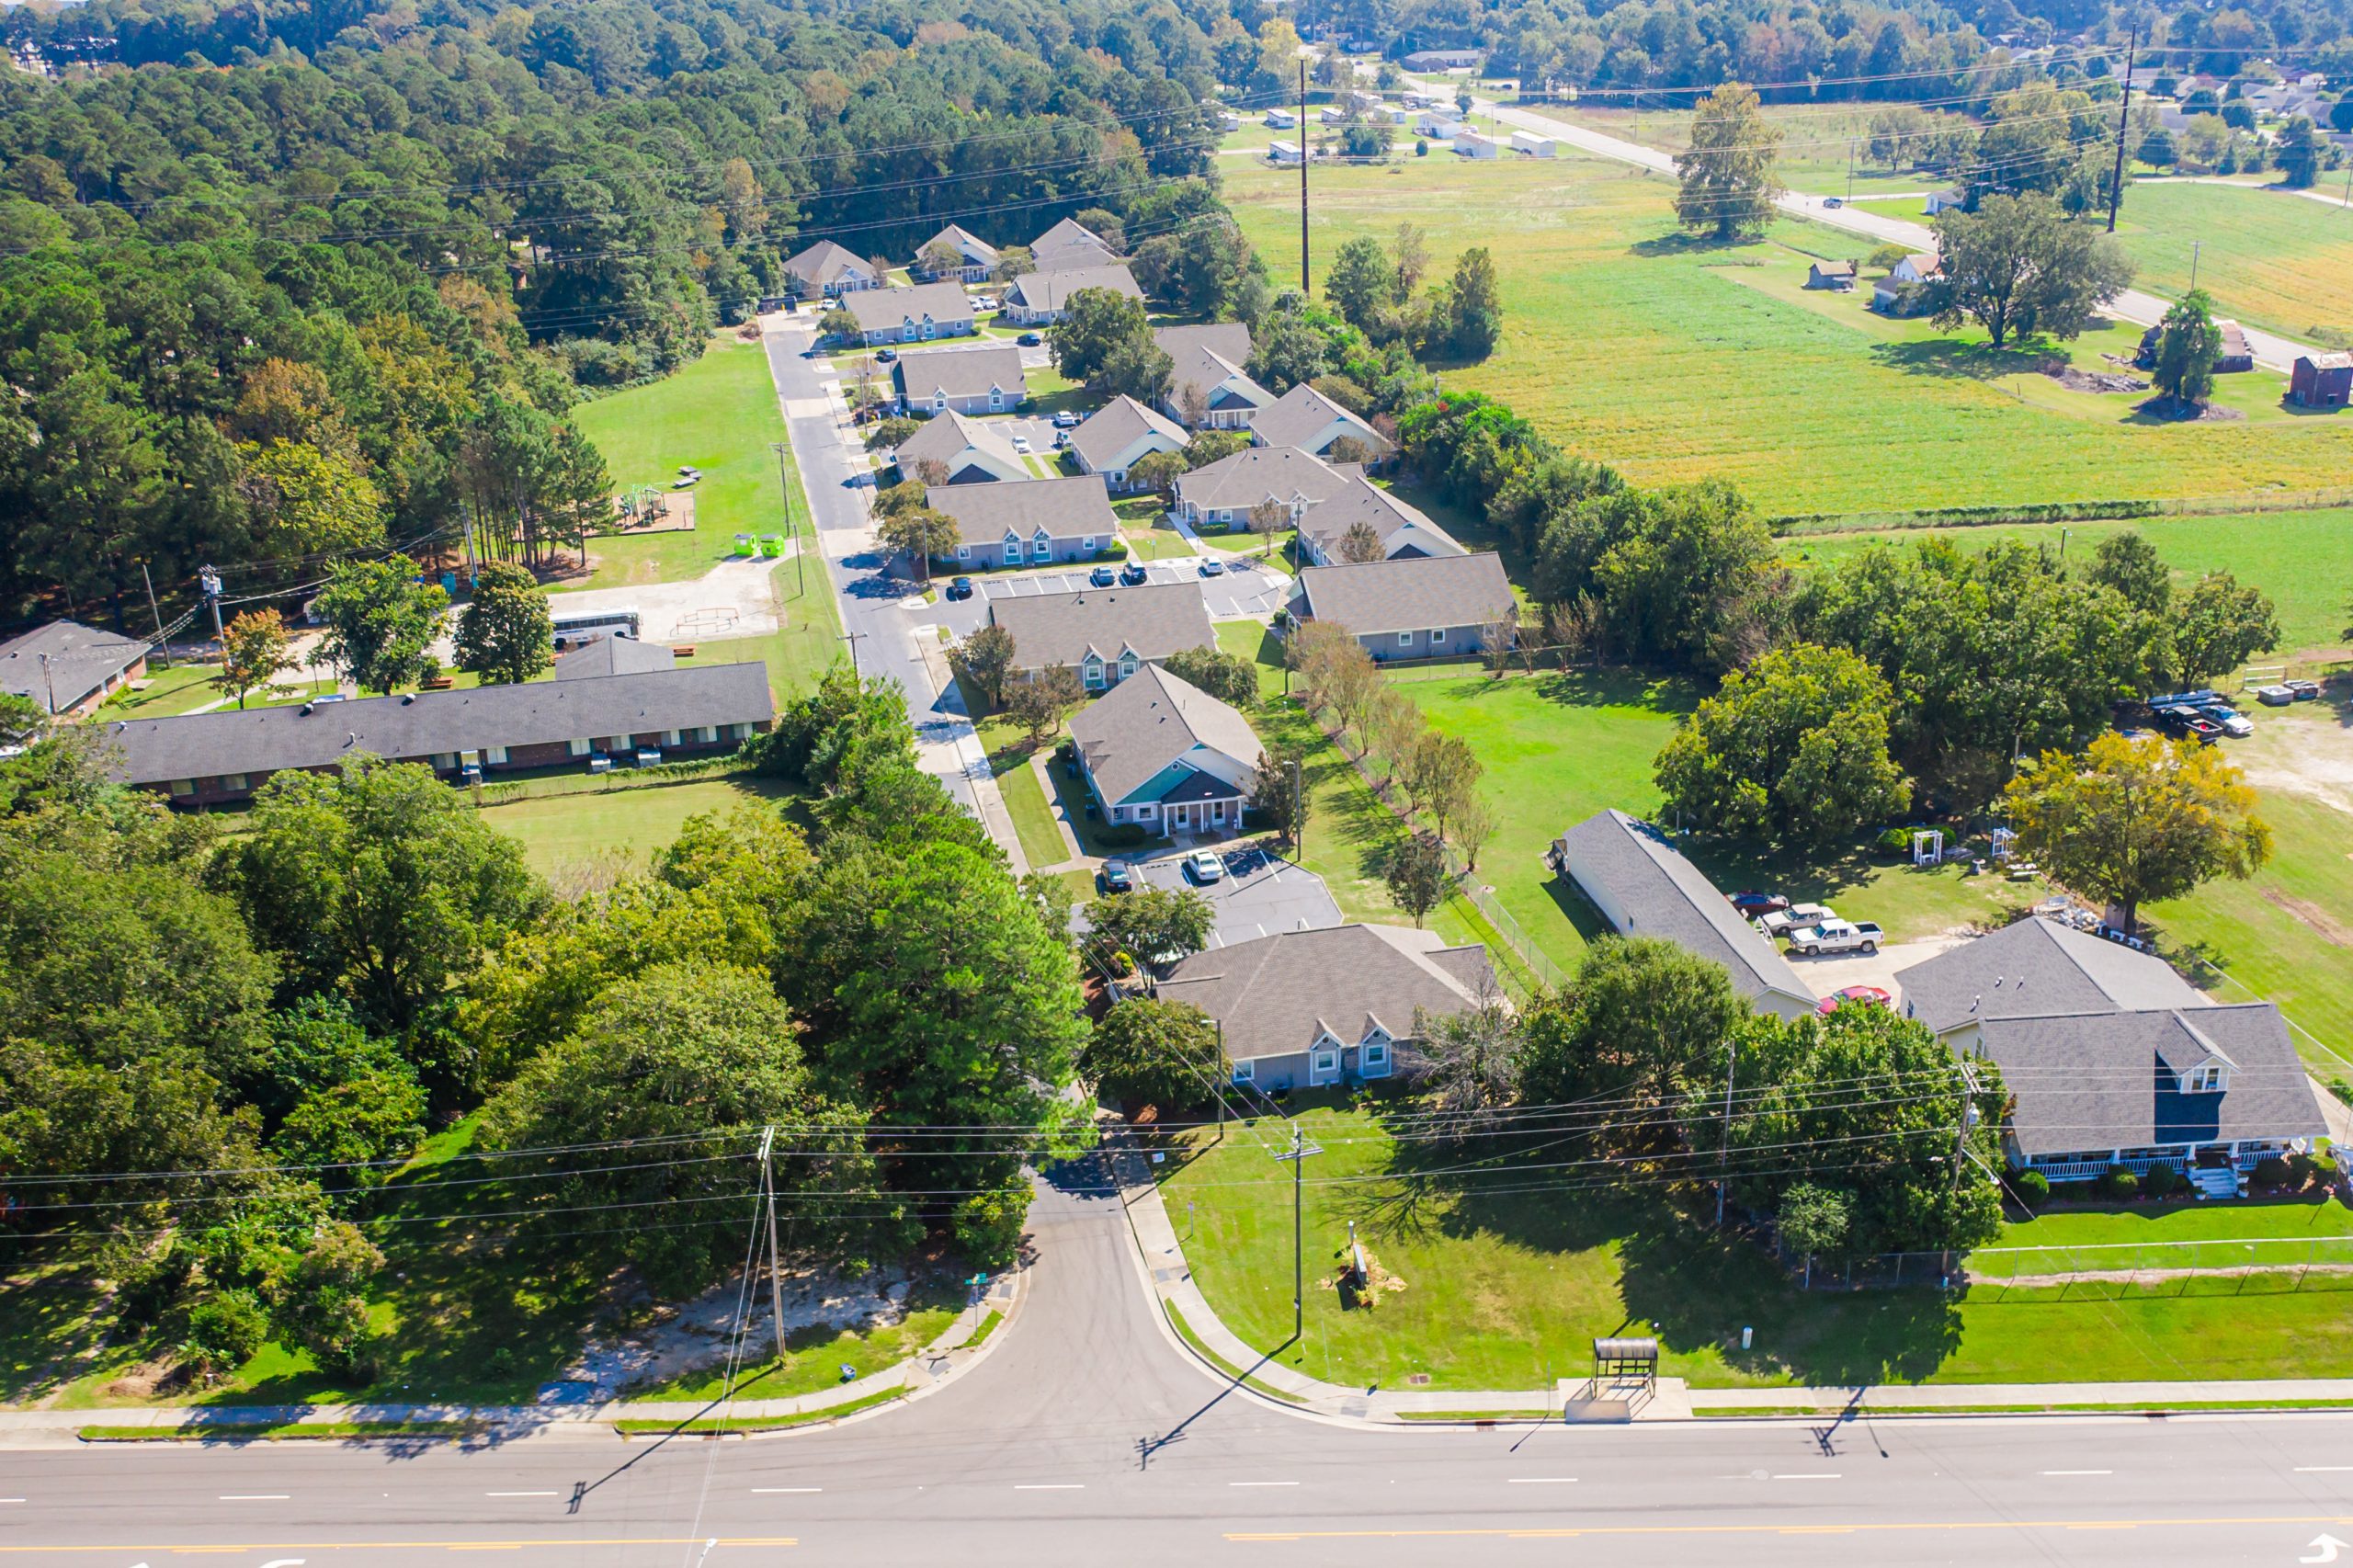 Aerial shot of Gregg Court Apartments